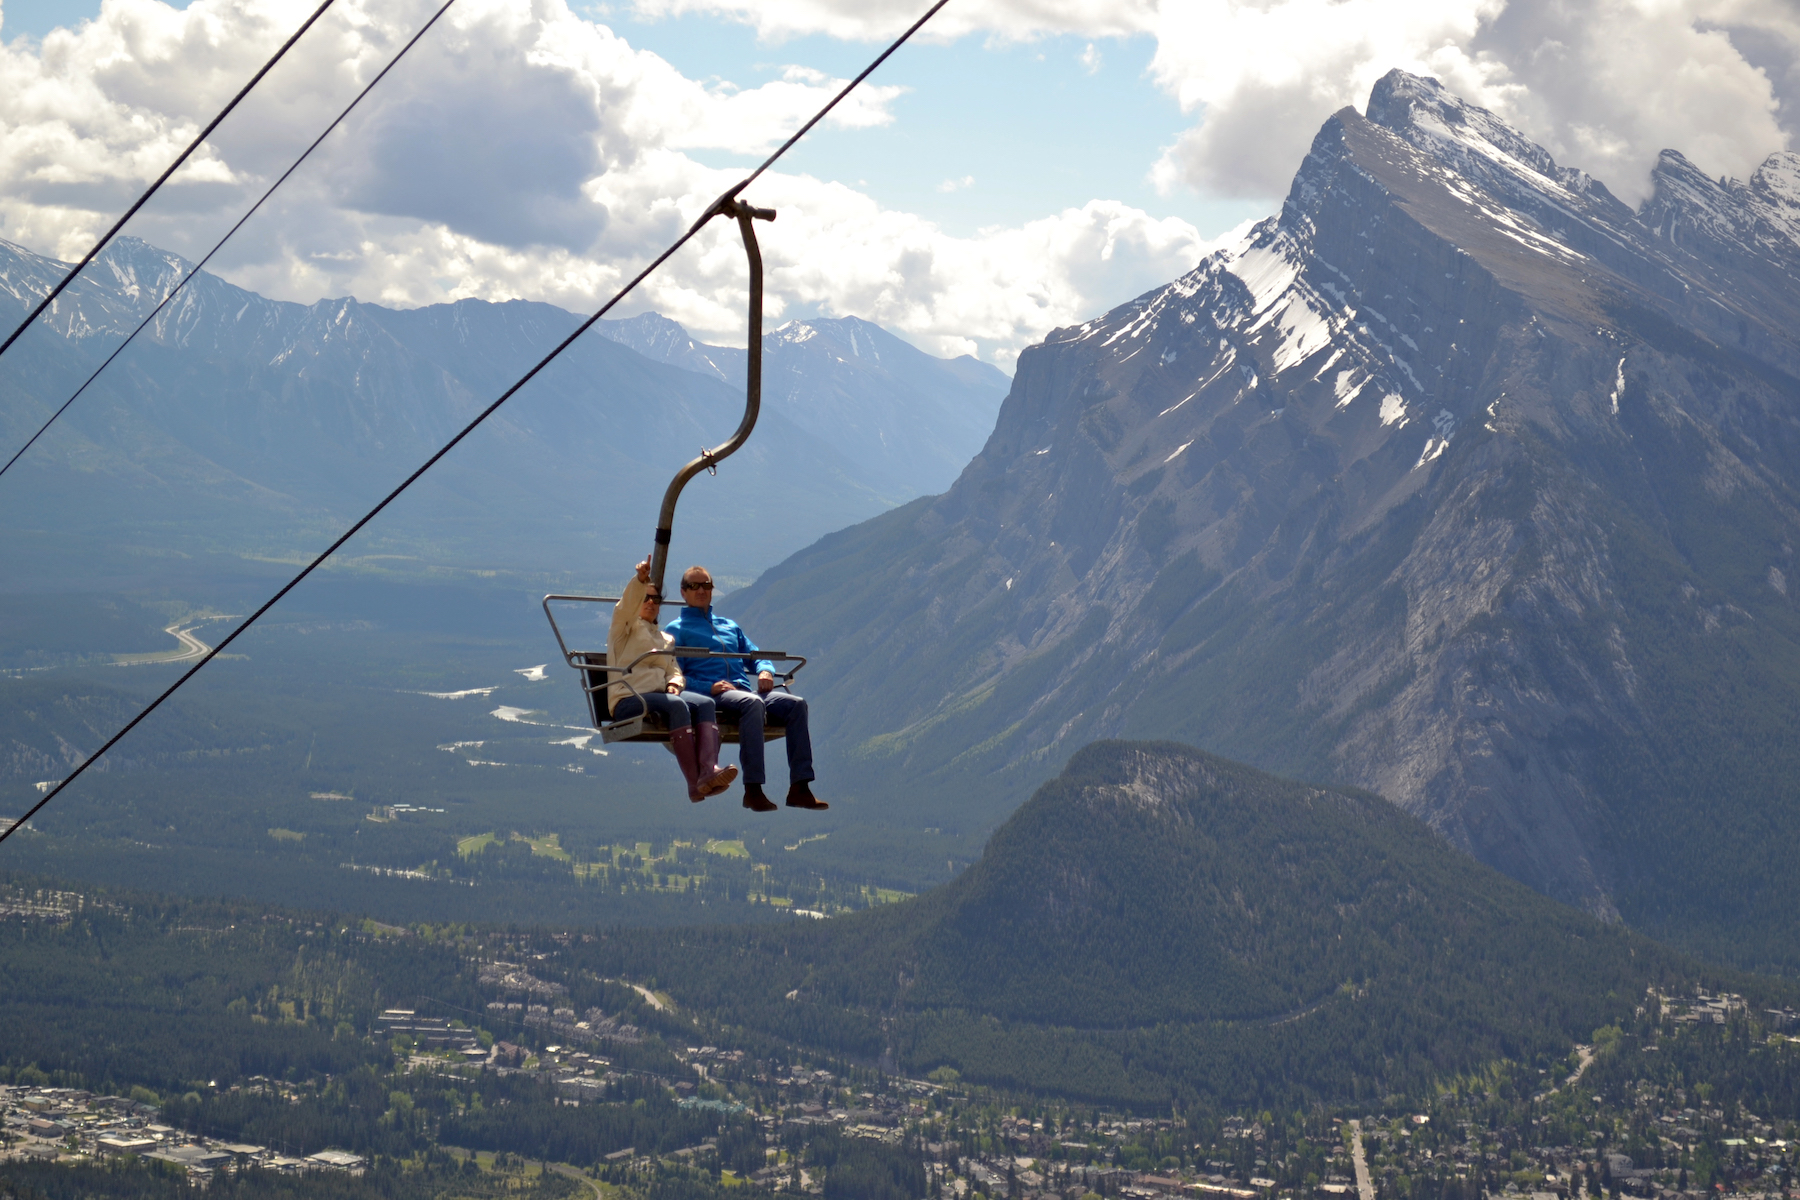 Mount Norquay Chairlift